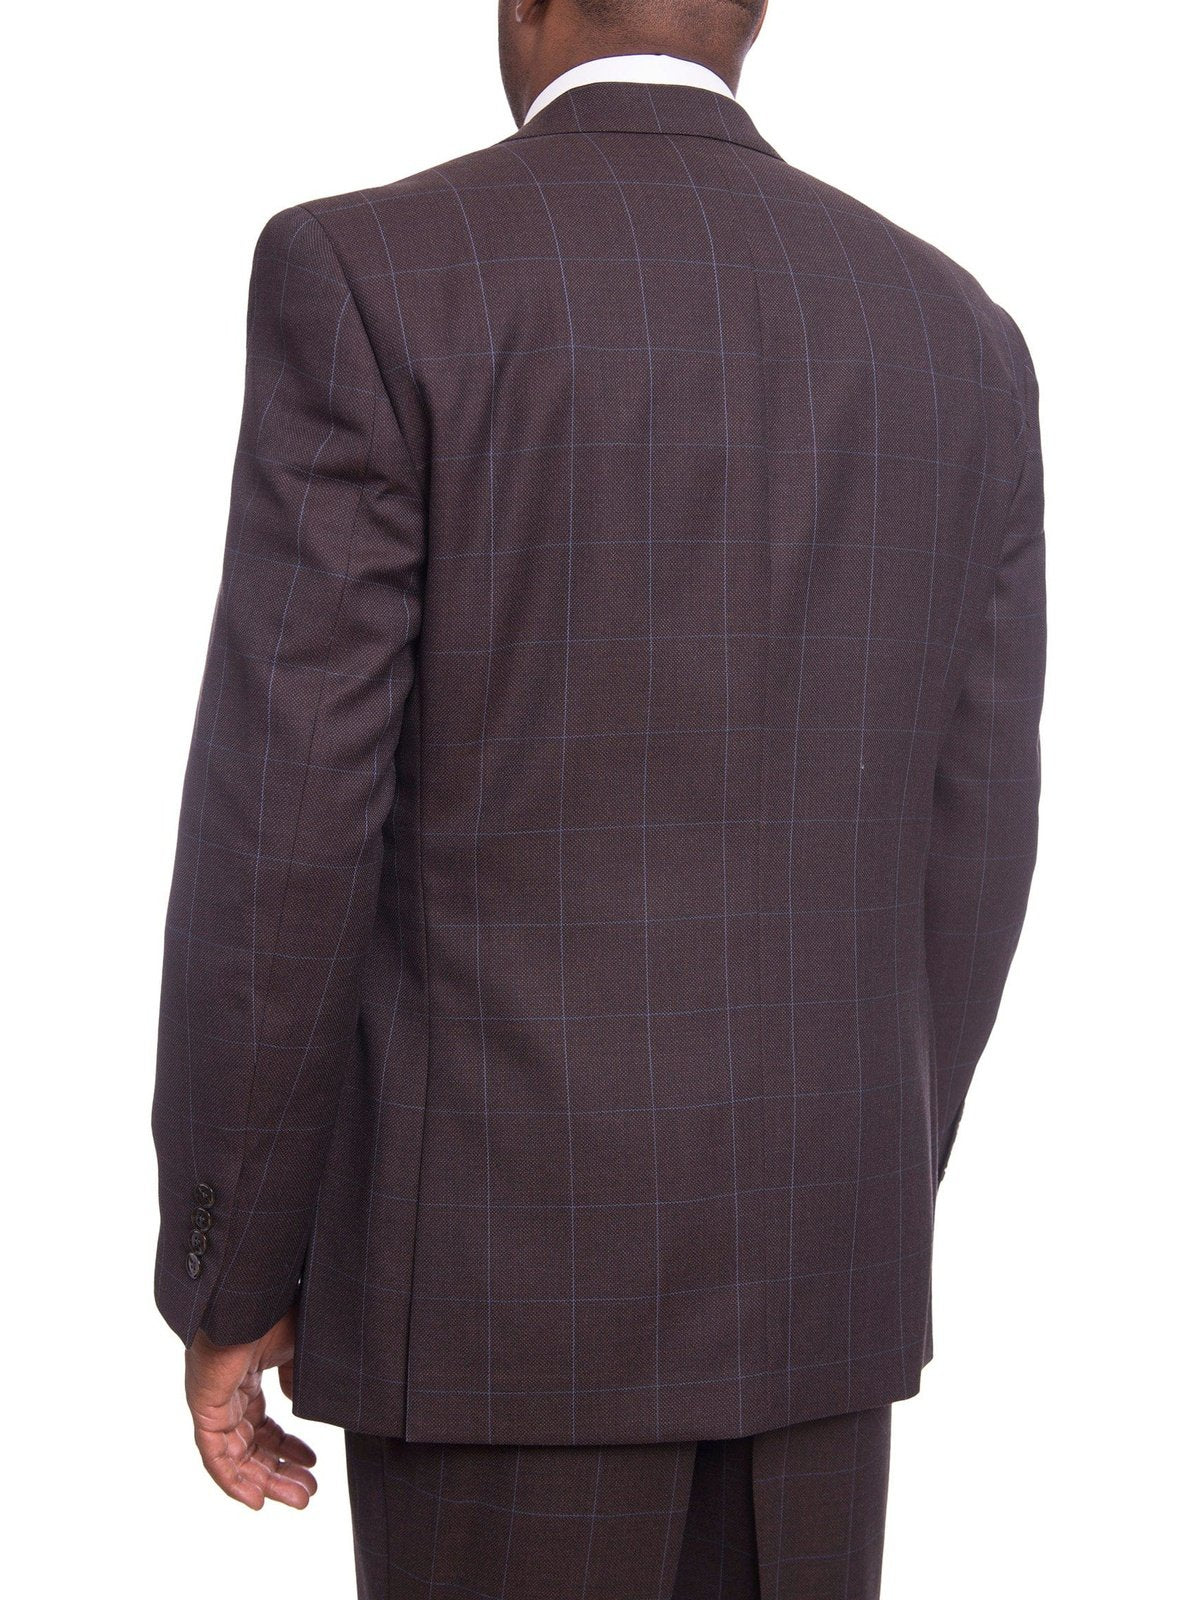 I Uomo TWO PIECE SUITS I Uomo Mens Regular Fit Brown With Blue Overcheck 2 Button Wool Suit